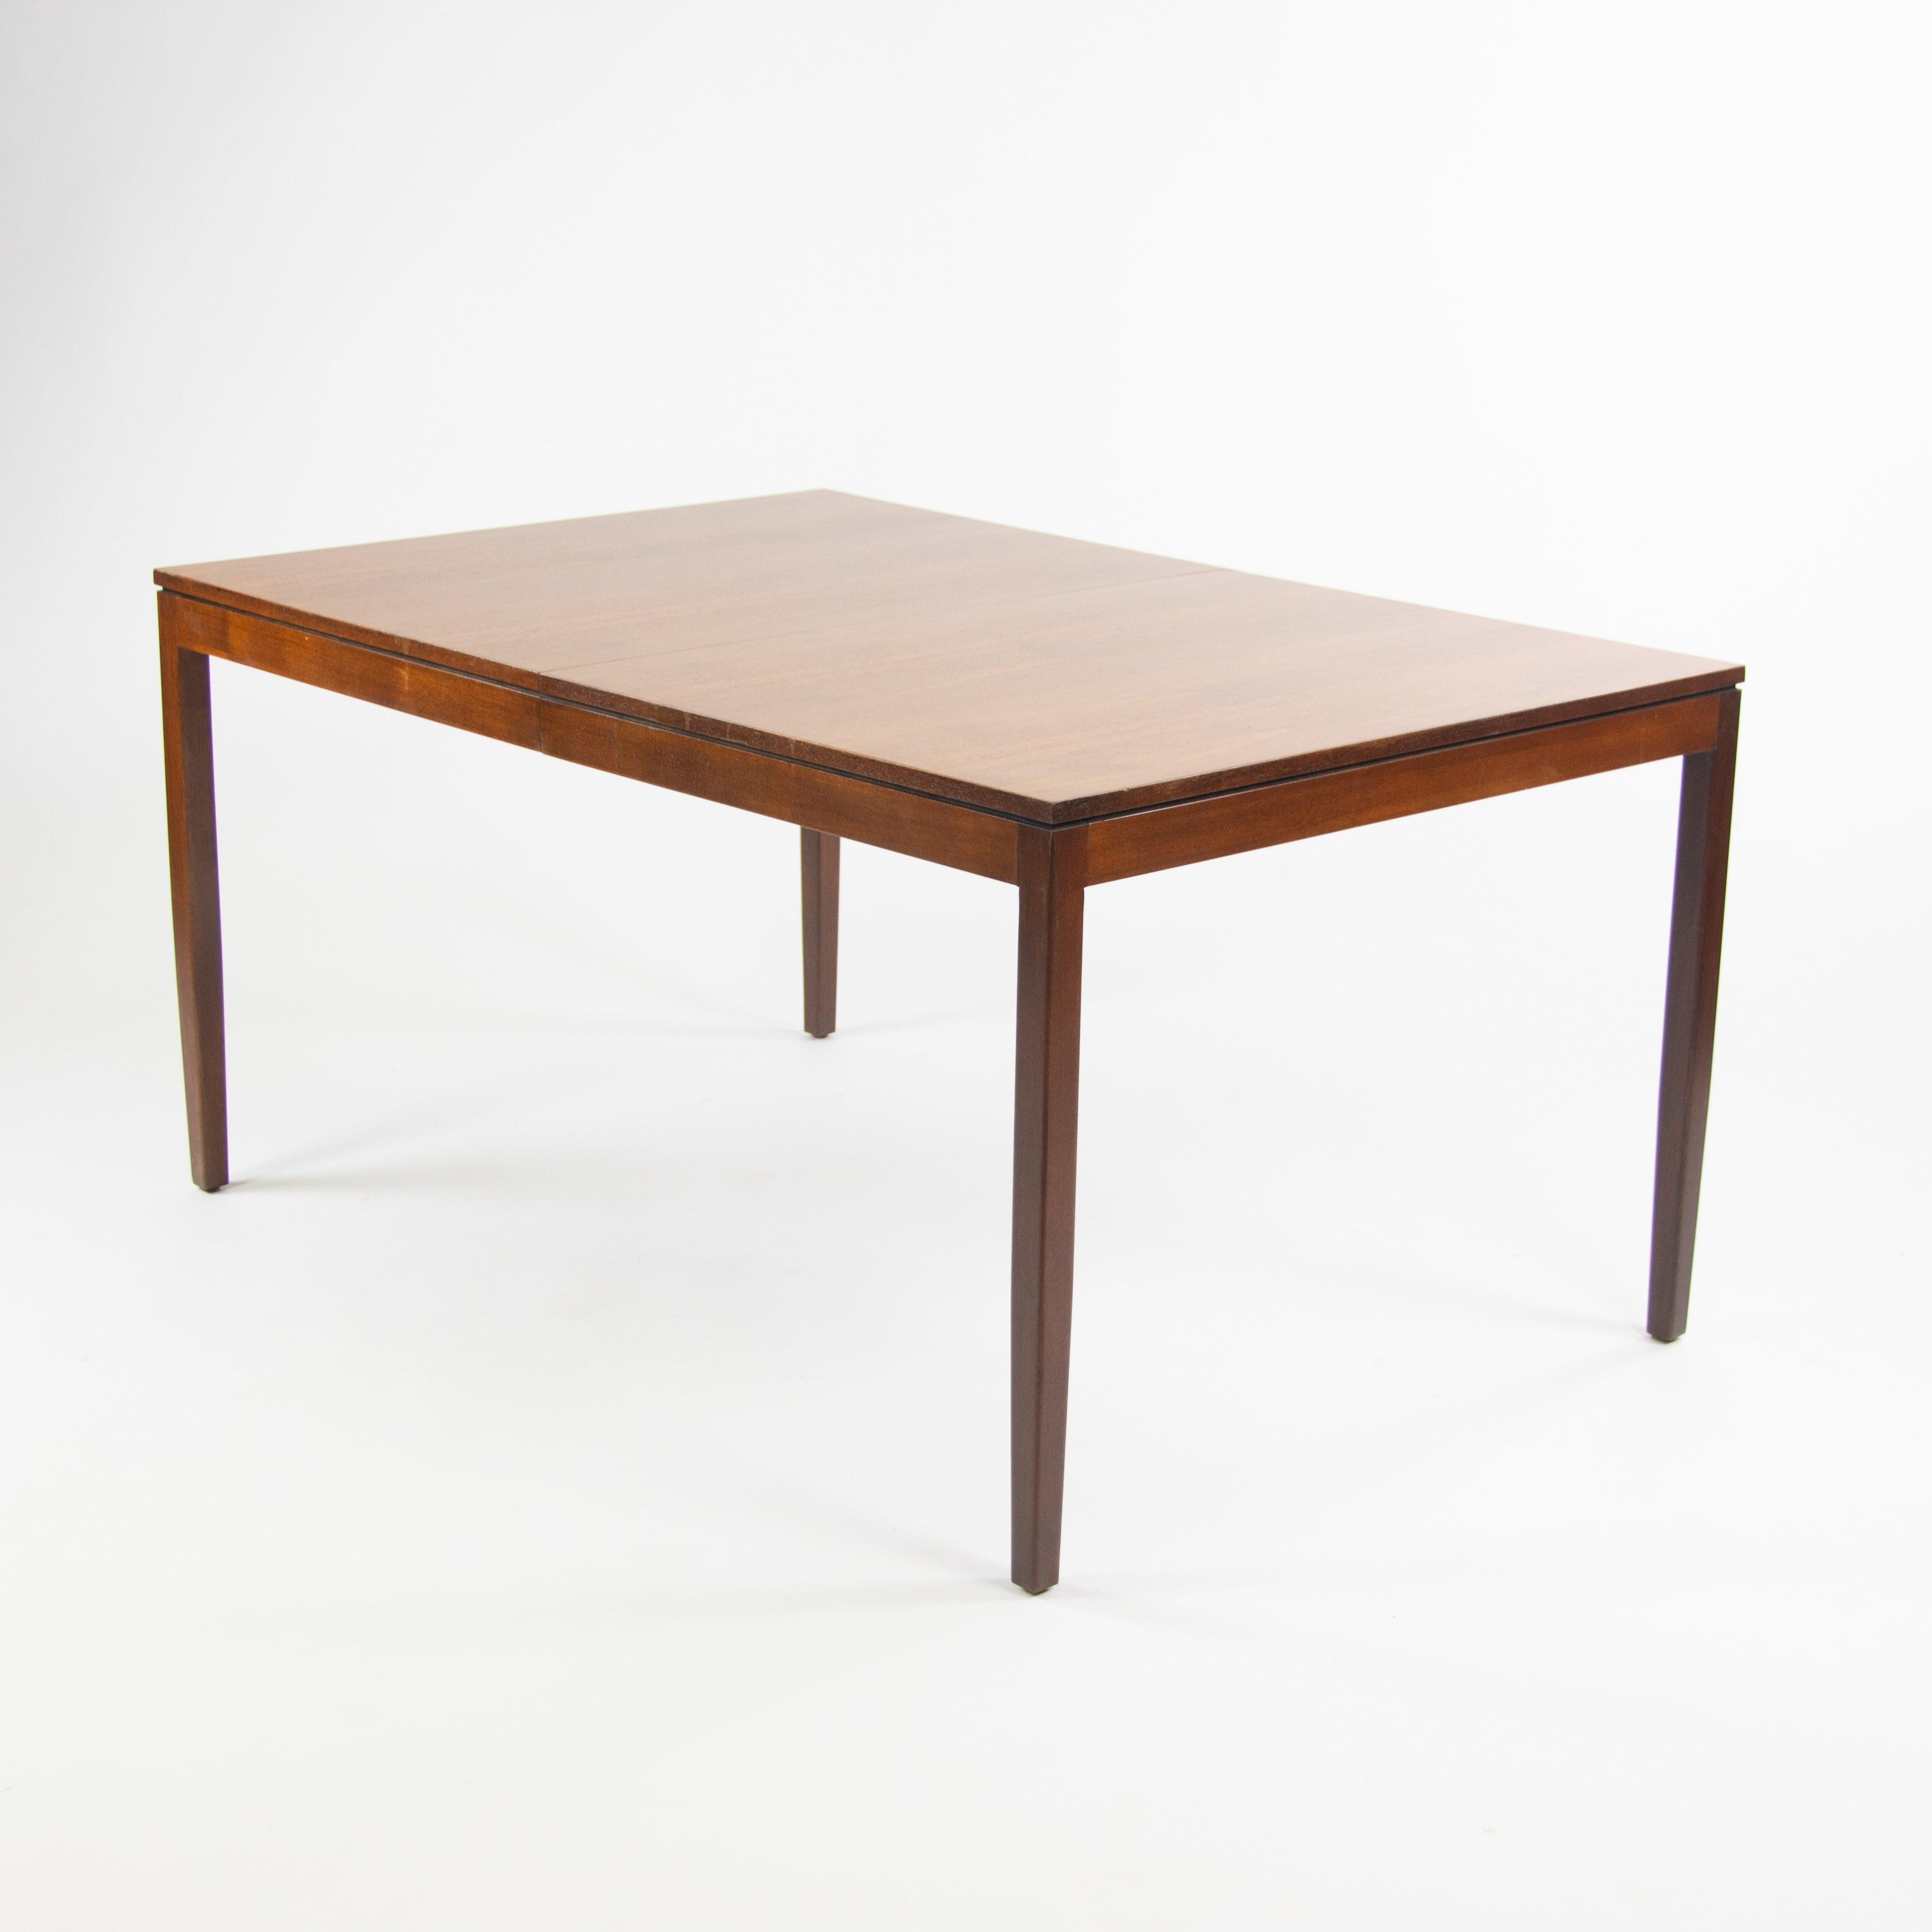 Modern 1950's Rare Original Florence Knoll Walnut Dining Table w/ Leaf 56-84 inches For Sale